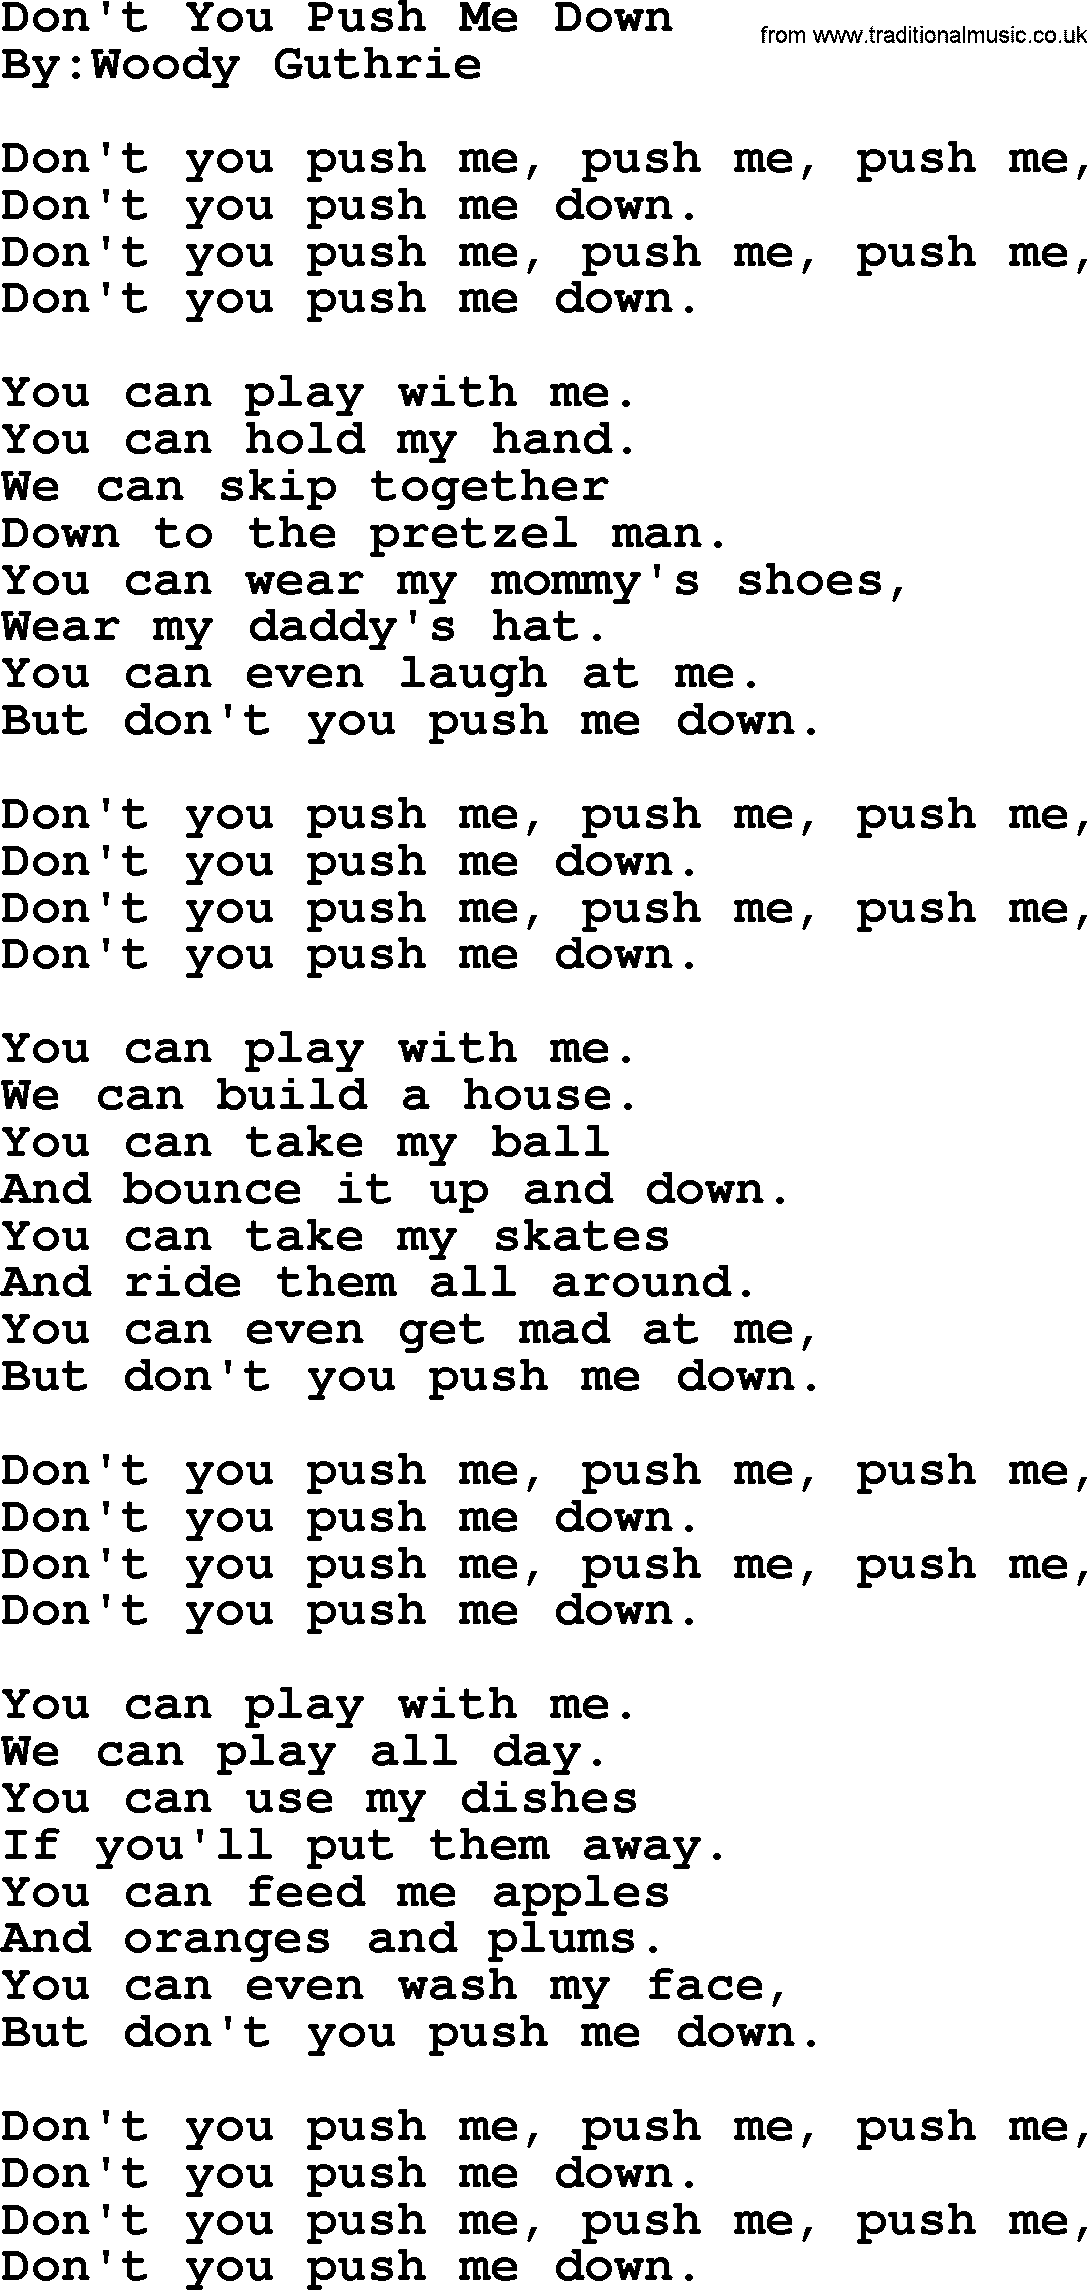 Political, Solidarity, Workers or Union song: Dont You Push Me Down, lyrics